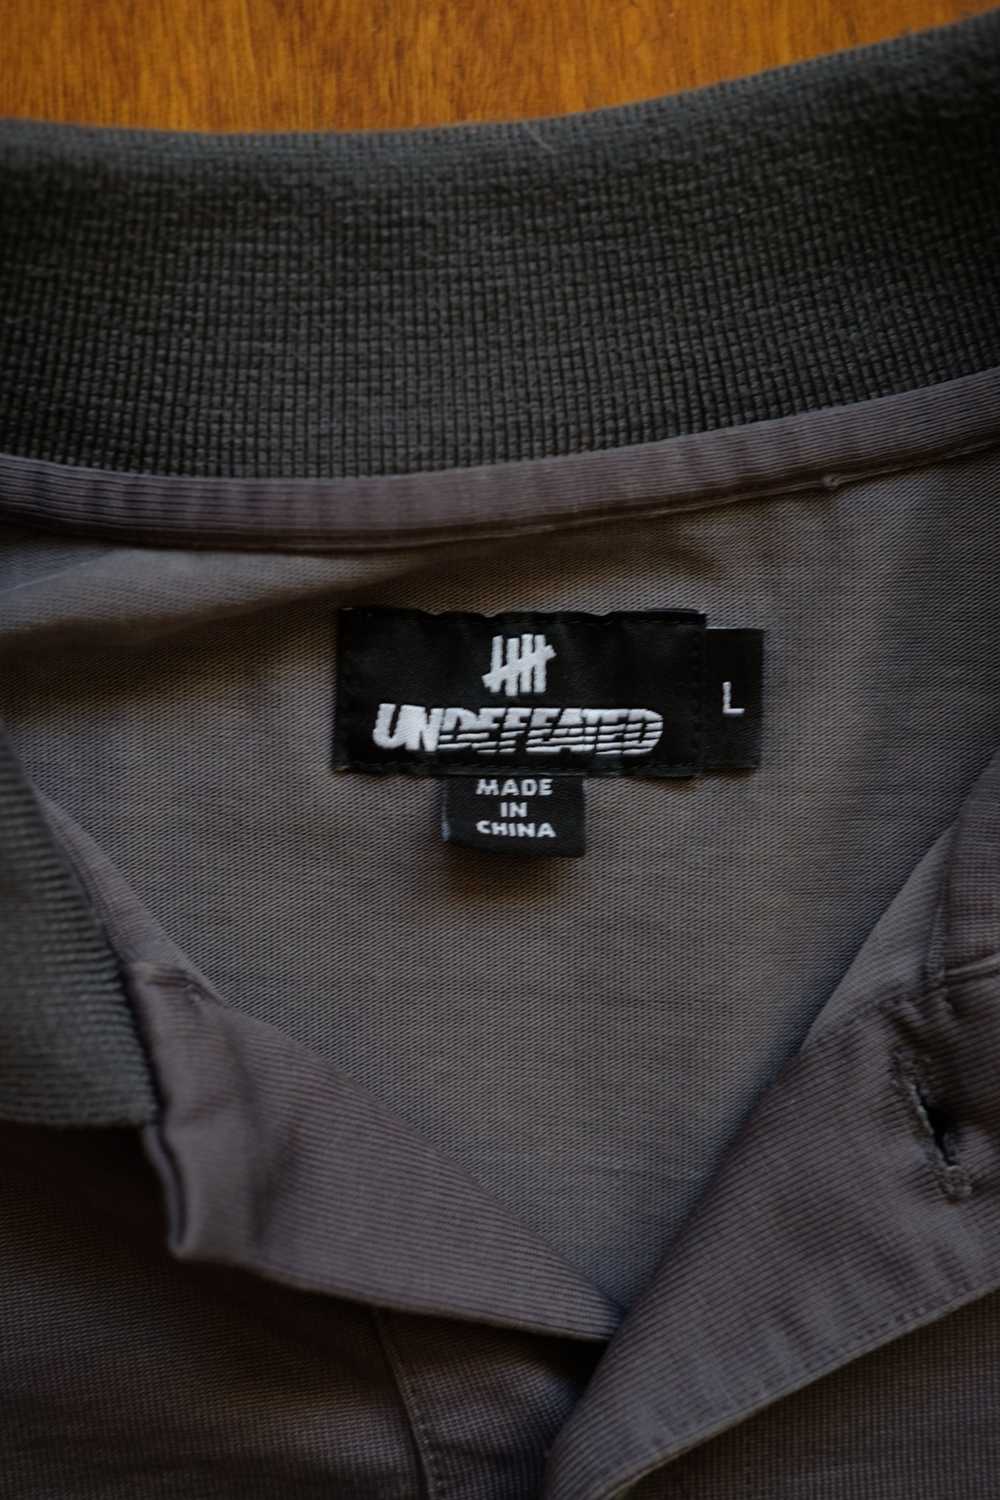 Undefeated Undefeated Jersey - image 4